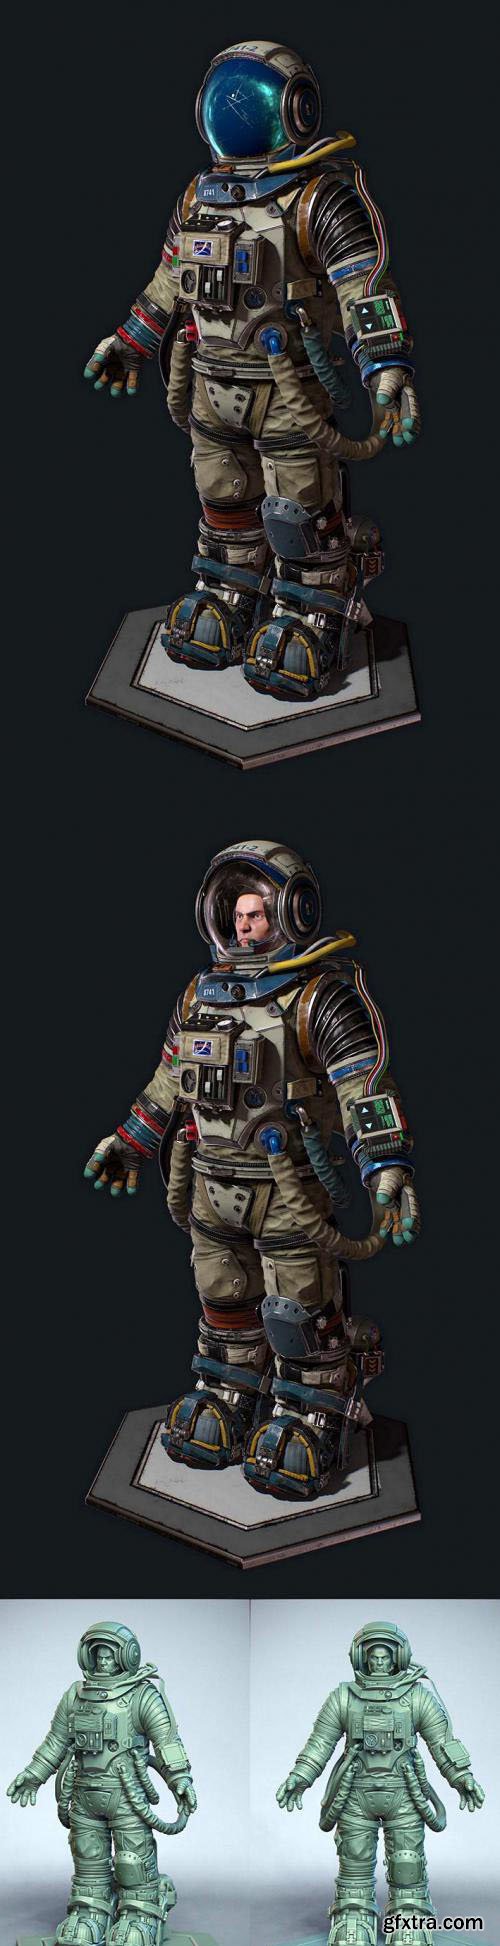 SPACE STATION SUPPORT ENGINEER